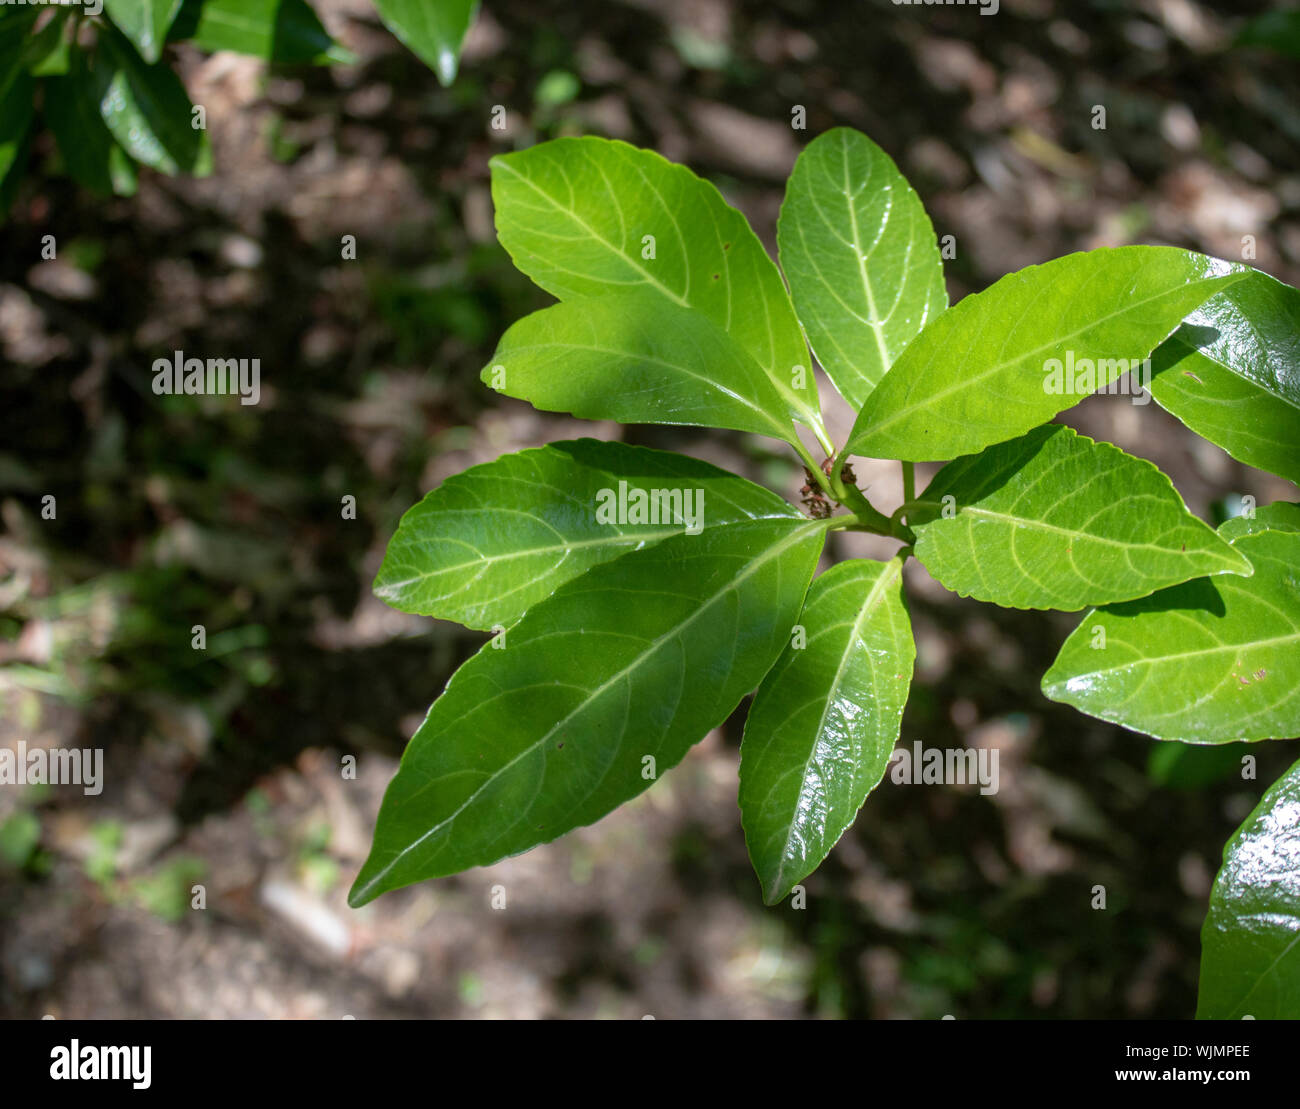 Leaves of laurel tree in Portugal close up. filmed in the spring. Leaves in green color Stock Photo